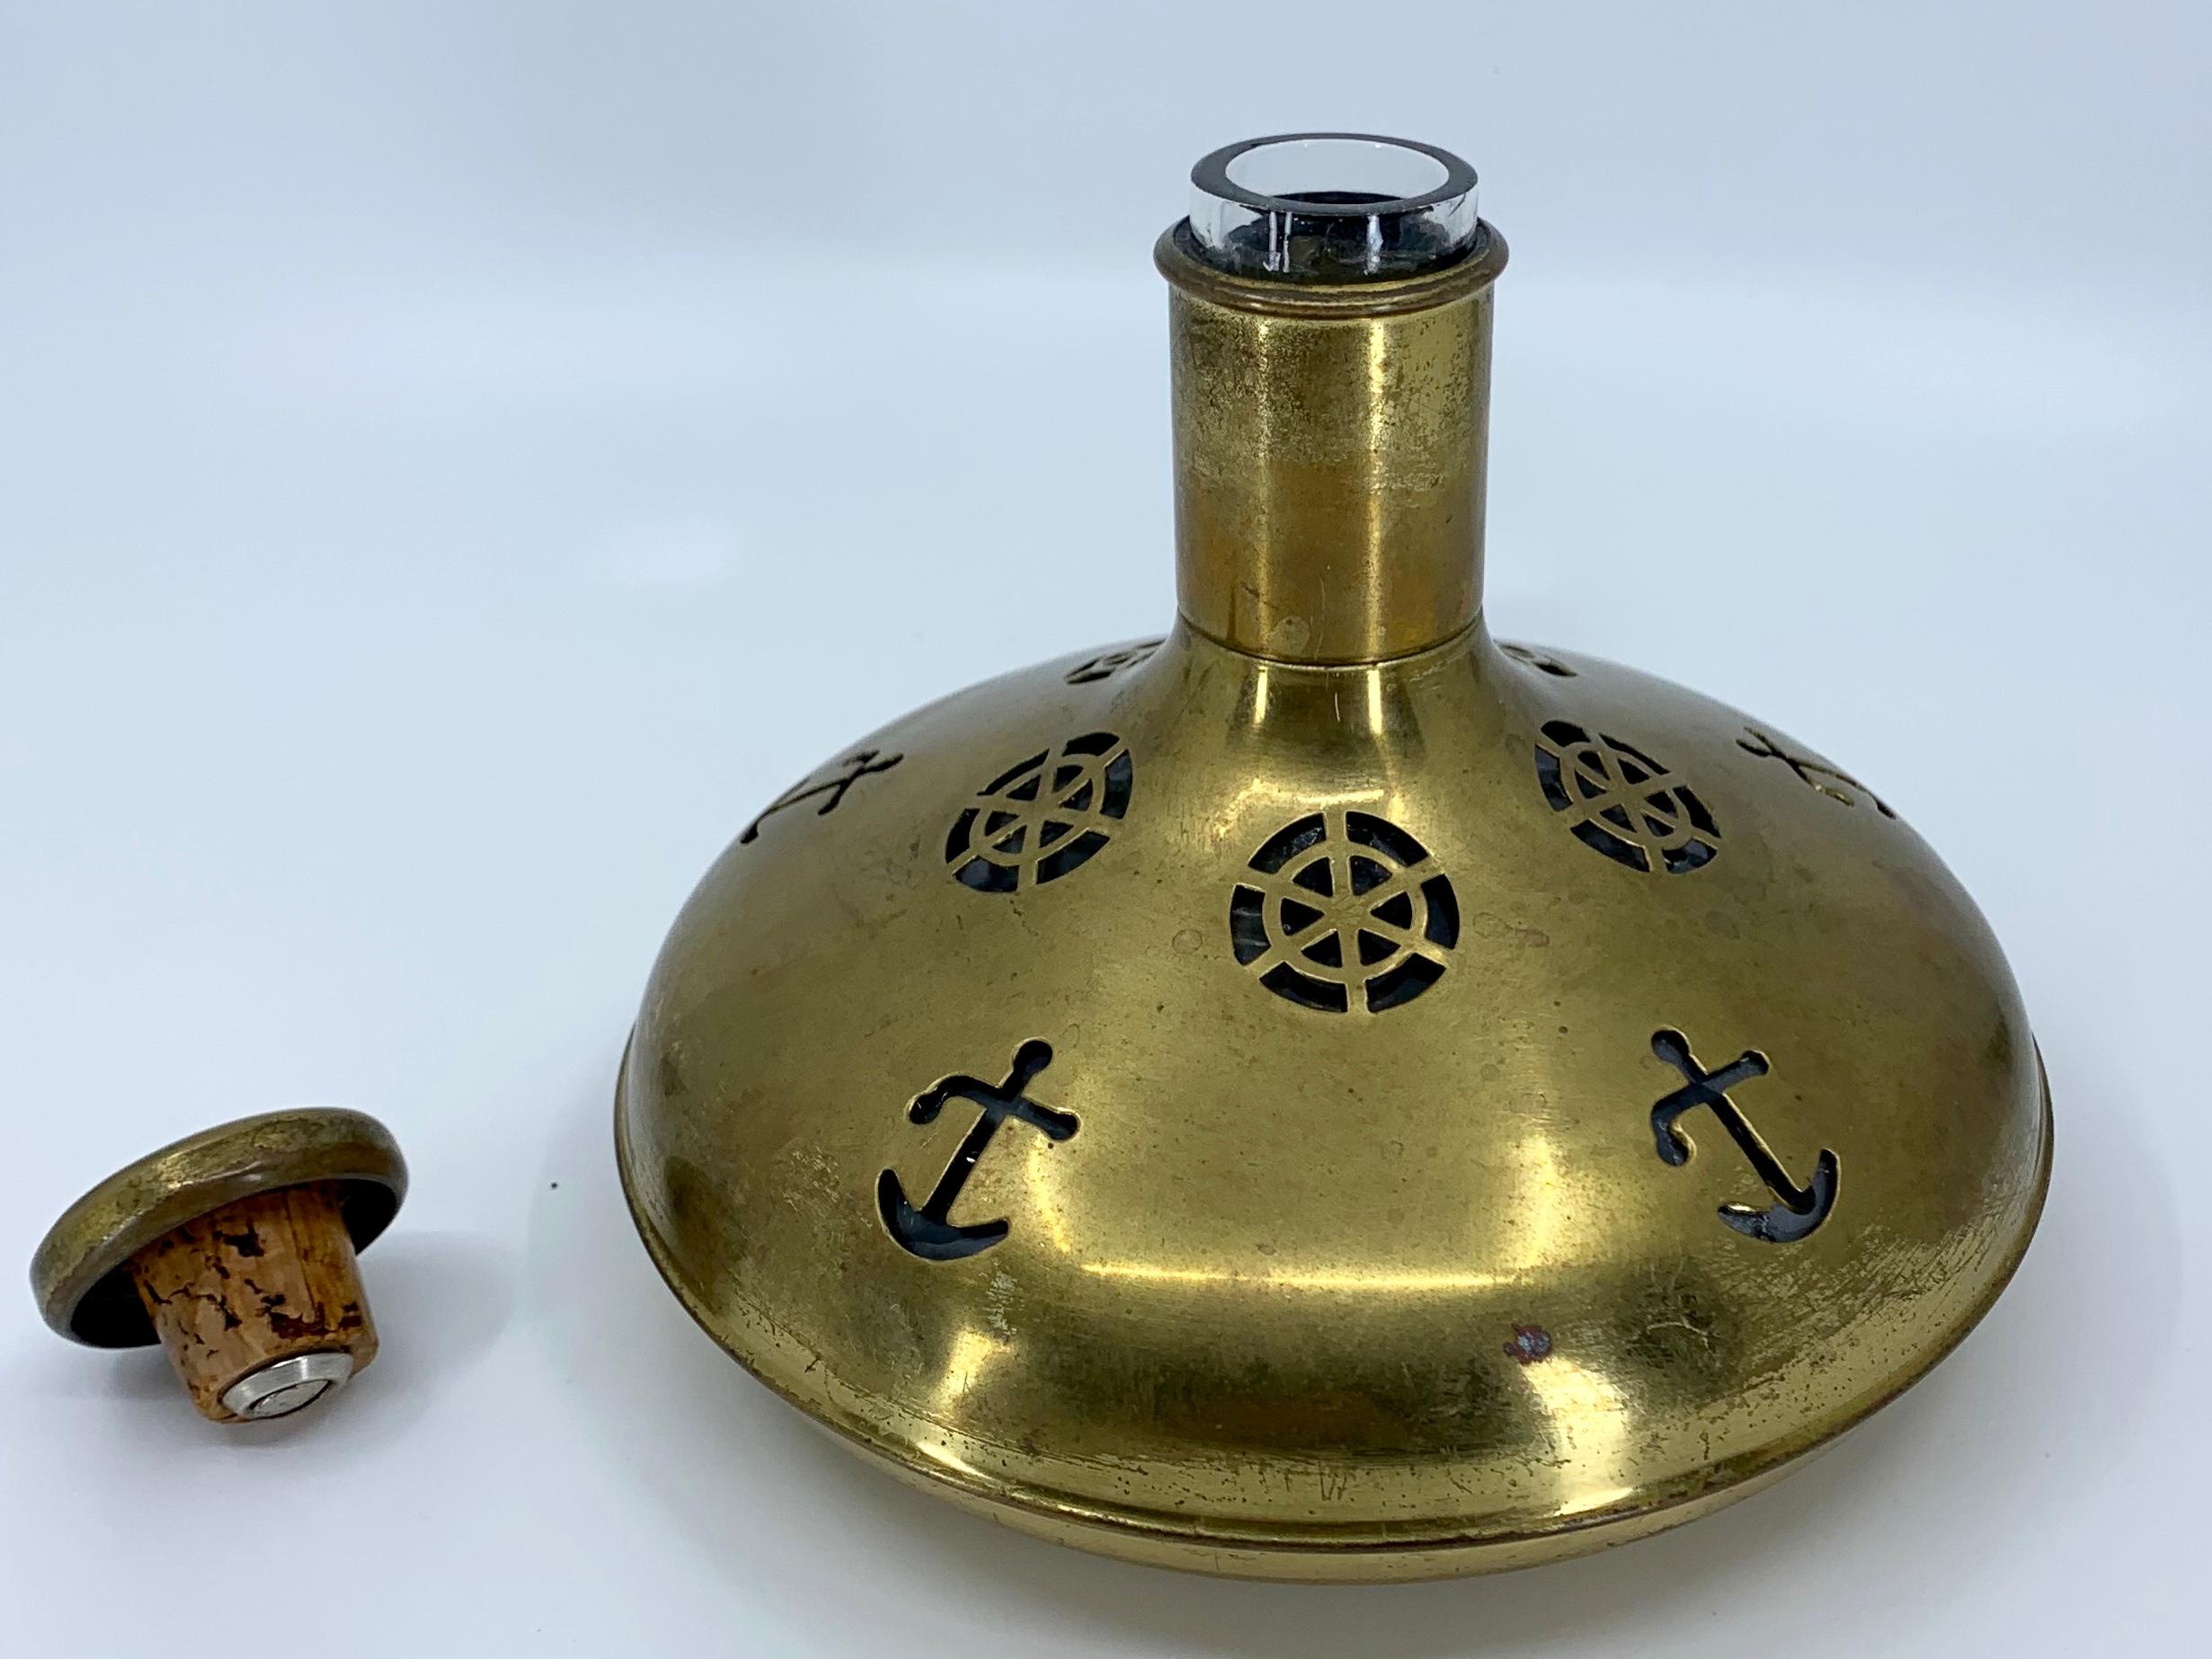 Vintage Swedish brass nautical flask. Midcentury pierced brass encased glass bottle and stopper with ship’s wheel and anchor designs; perfect for the captain’s table and every boating picnic. Sweeden, mid-20th century.
Dimensions: 7